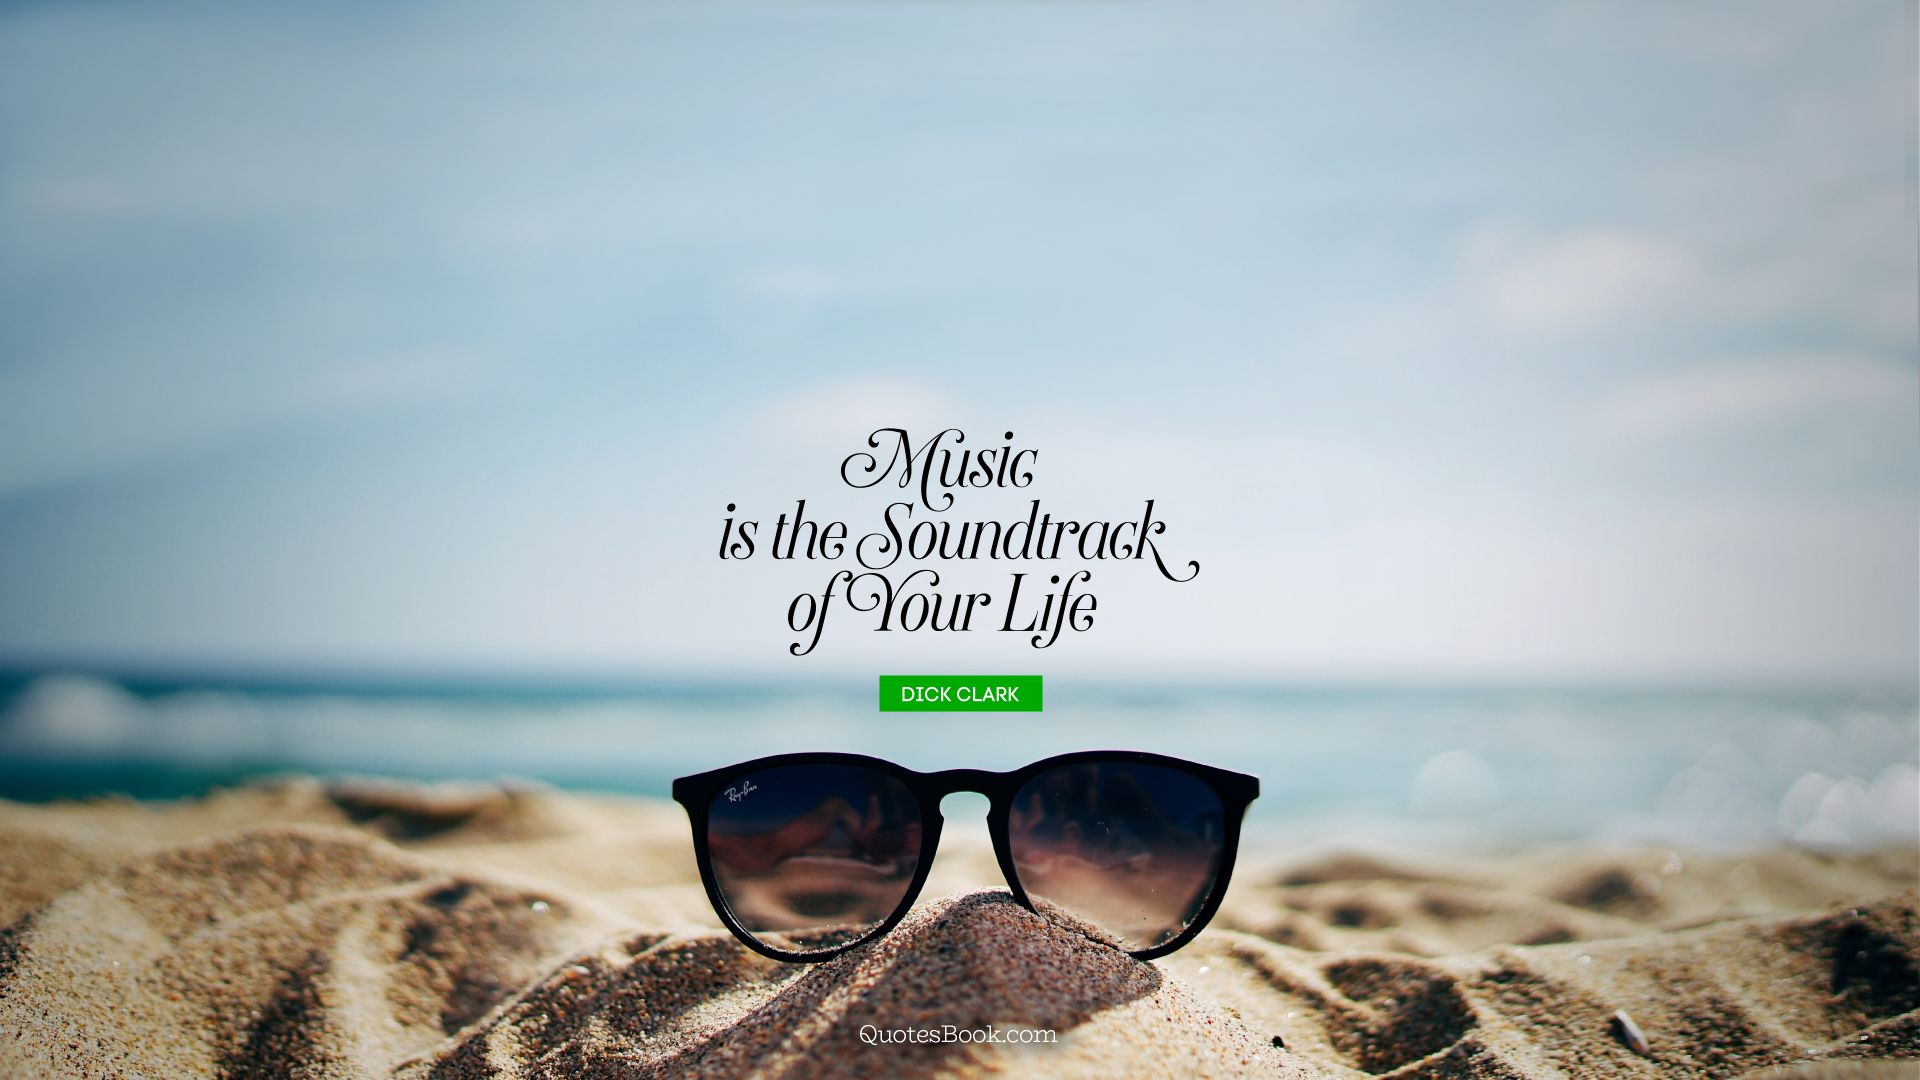 Music is the soundtrack of your life. - Quote by Dick Clark